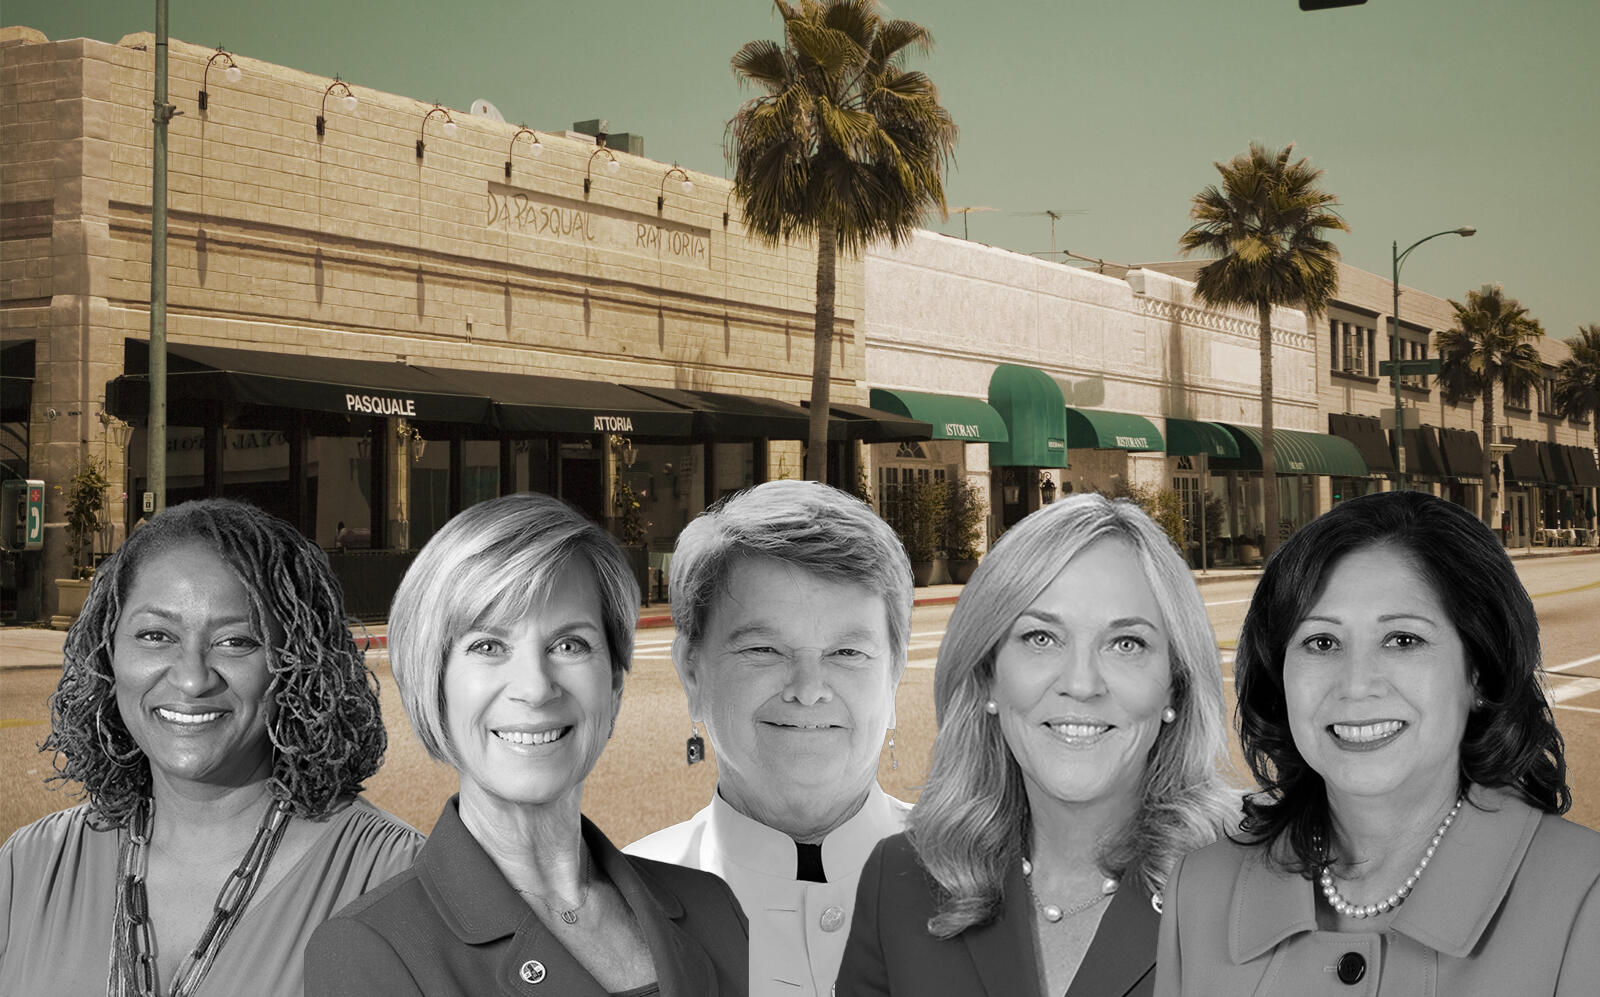 LA County Board of Supervisors. From left to right: Holly J. Mitchell, Janice Hahn, Sheila Kuehl, Kathryn Barger and Hilda L. Solis (Getty, Board of Supervisors)